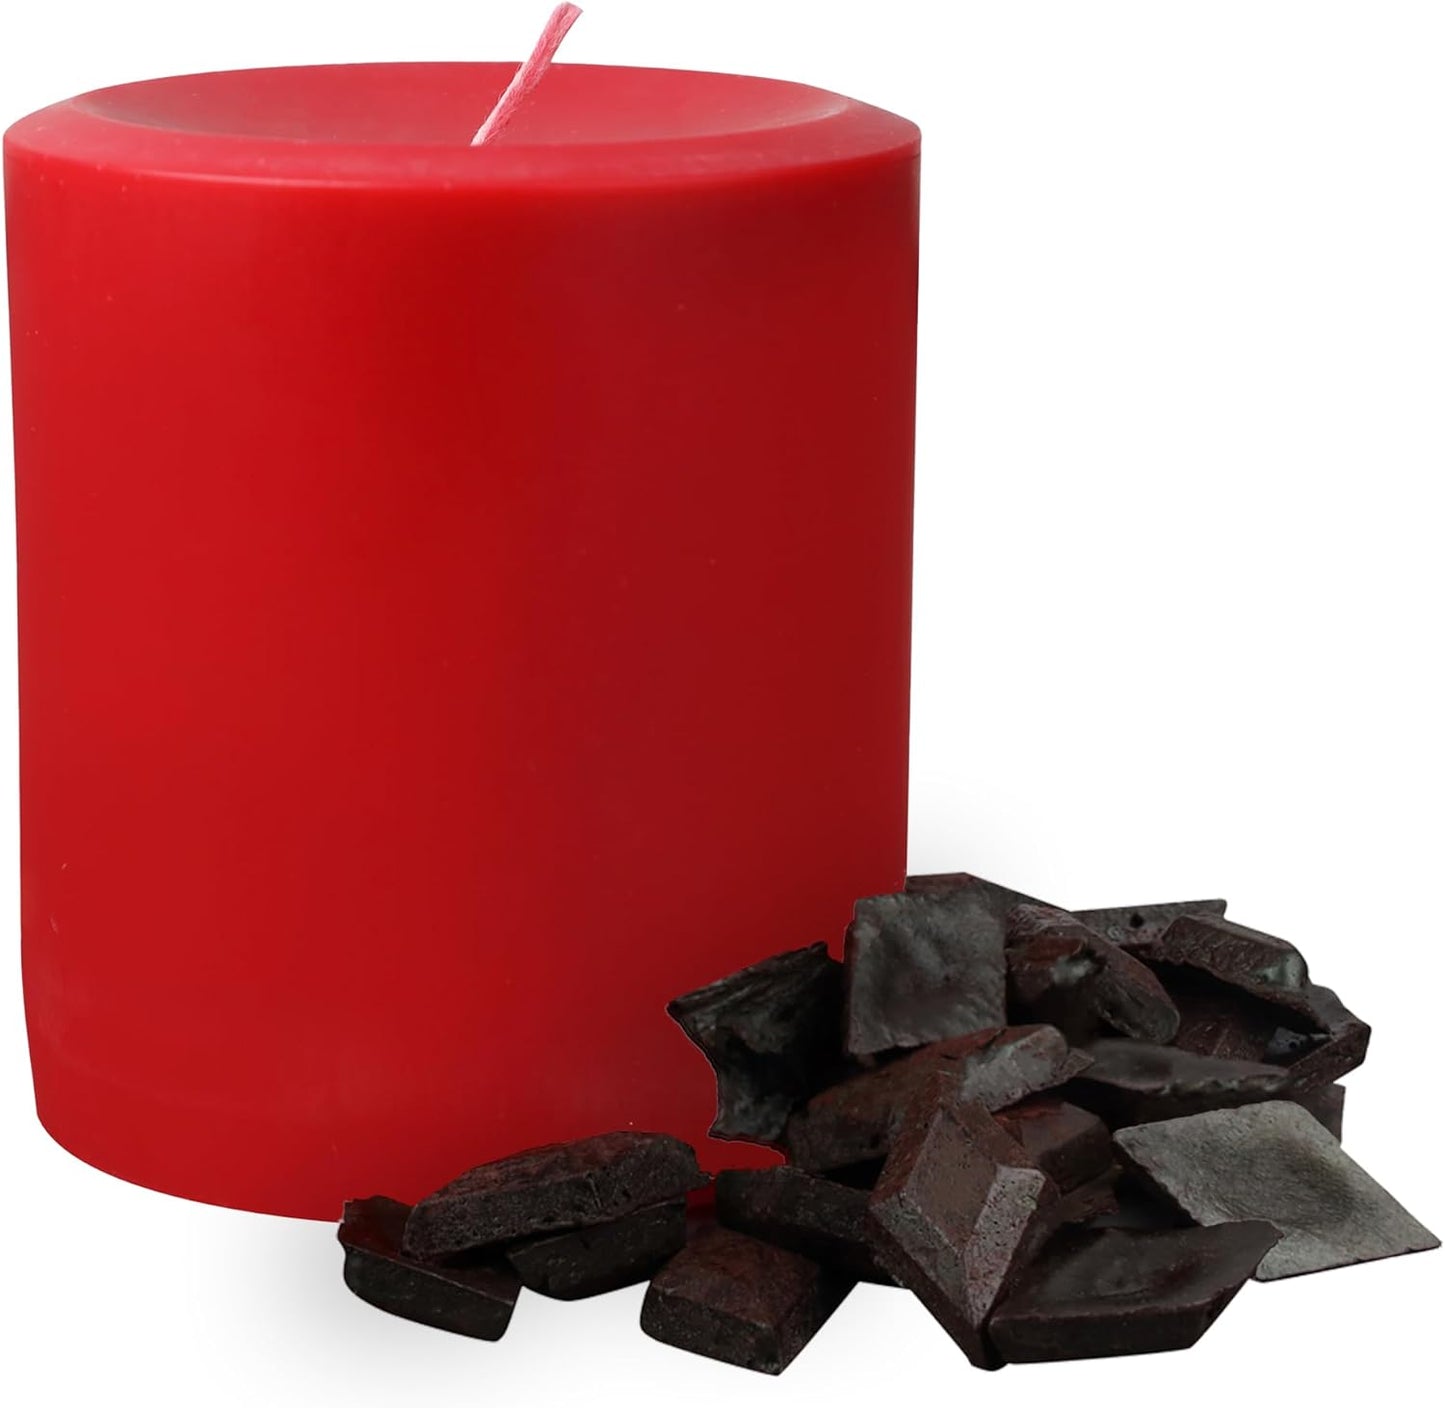 Black Candle Dye for Candle Making - Made in the USA - Easy to Use - Highly Concentrated - Candle Making Supplies for Soy or Paraffin Wax - Great Choice for Any Candle Maker - 25 Dye Chips